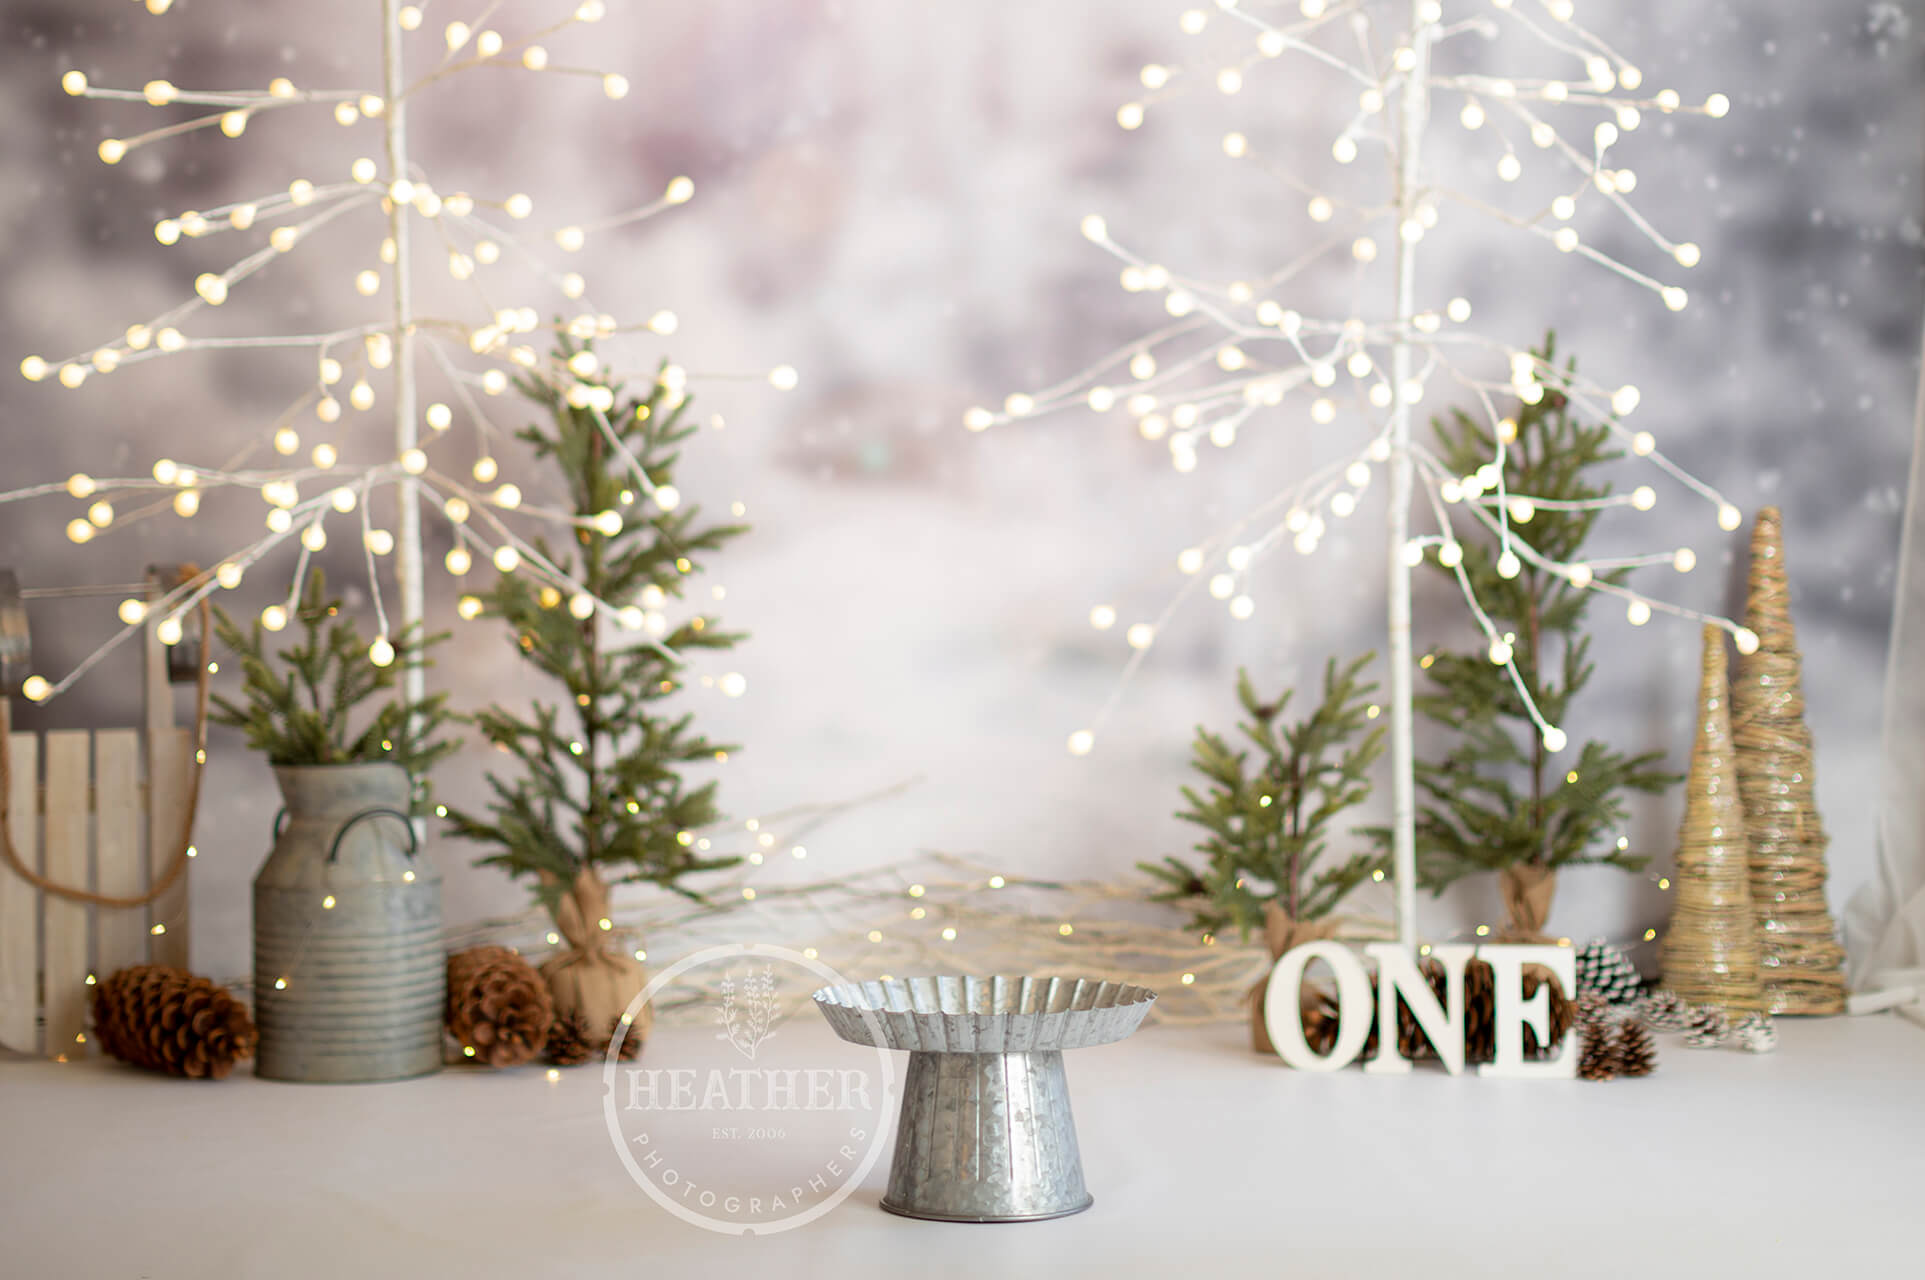 A festive backdrop featuring snowflakes, snowmen, and the number one, perfect for celebrating a first birthday with a winter theme.